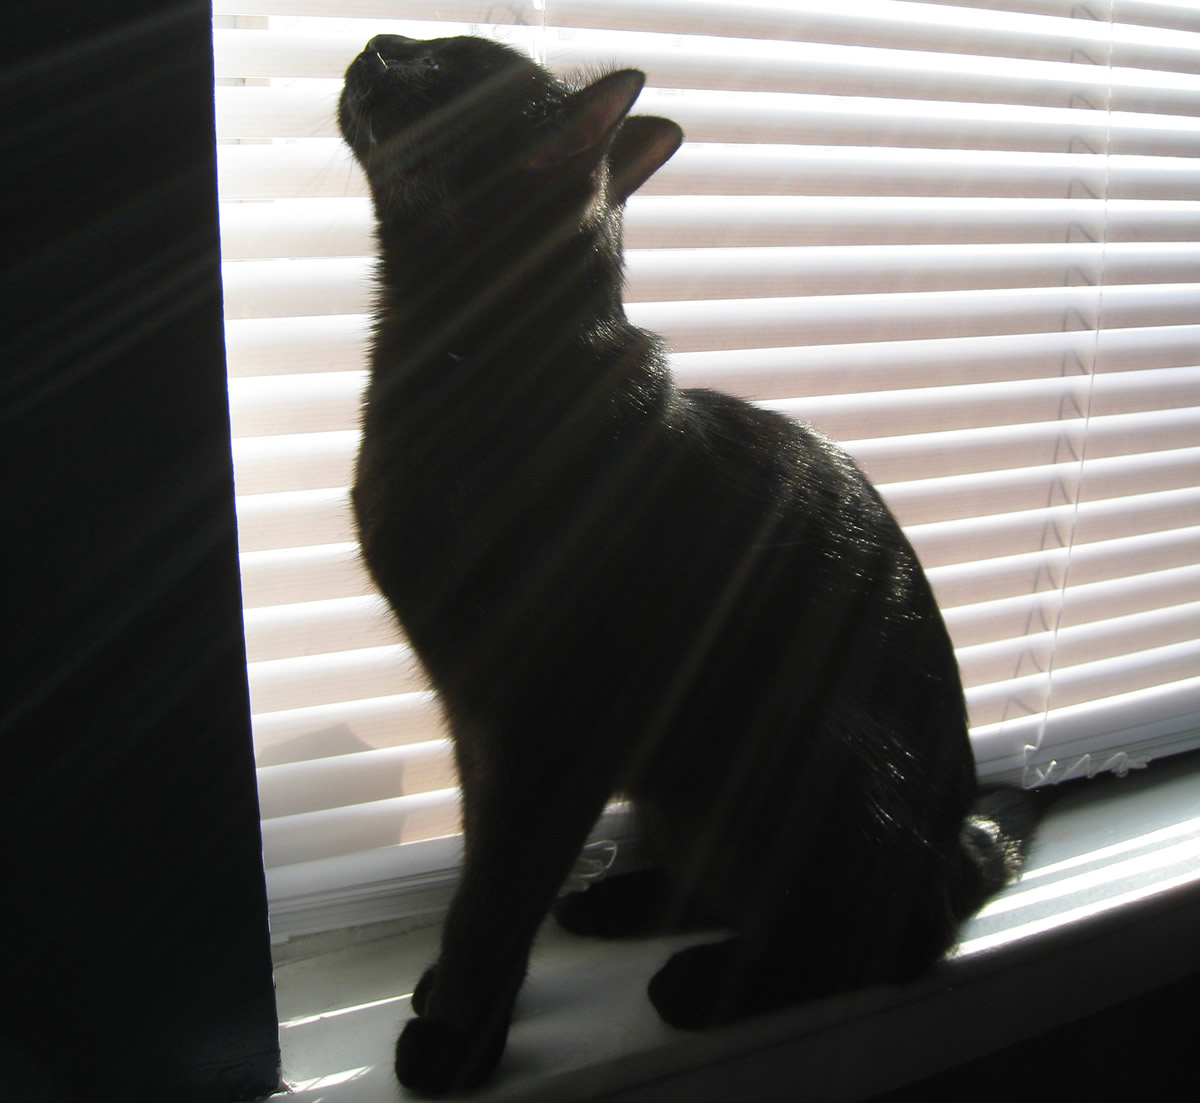 A grown black cat sitting on a window sill next to a mostly closed blind, looking up with rays of sunlight filtering around her silhouette.